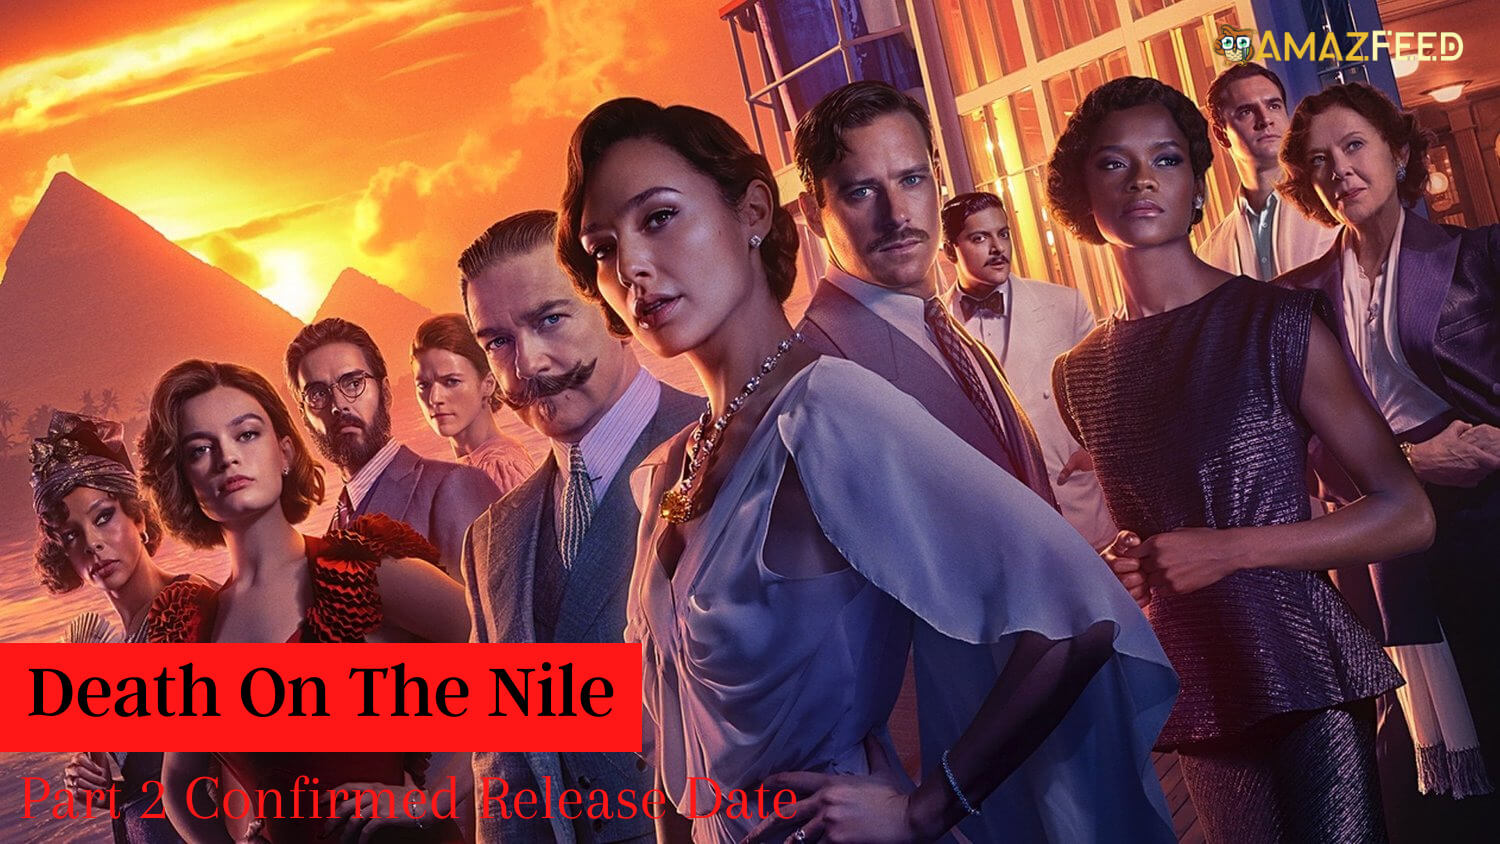 Death On The Nile Part 2 Confirmed Release Date